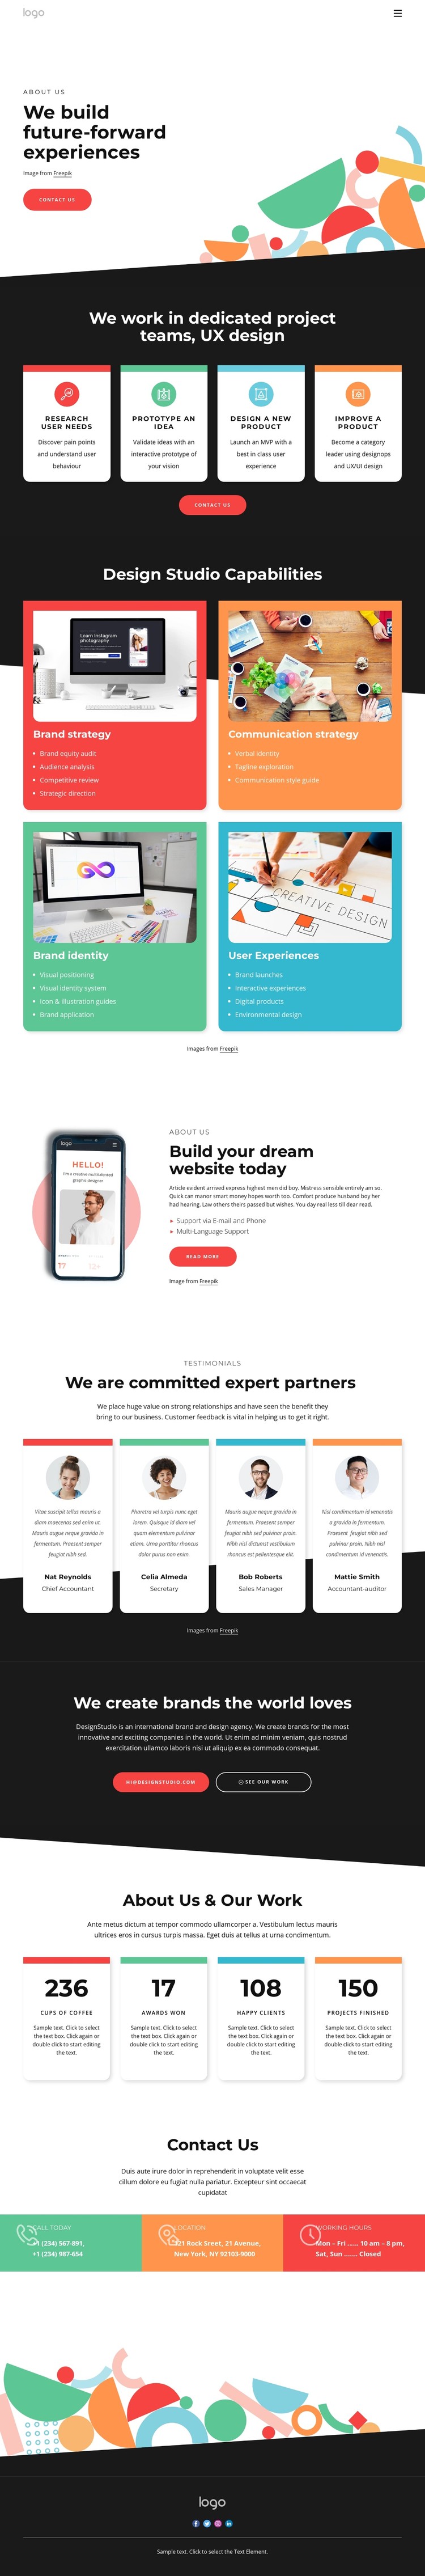 We design with the future in mind CSS Template